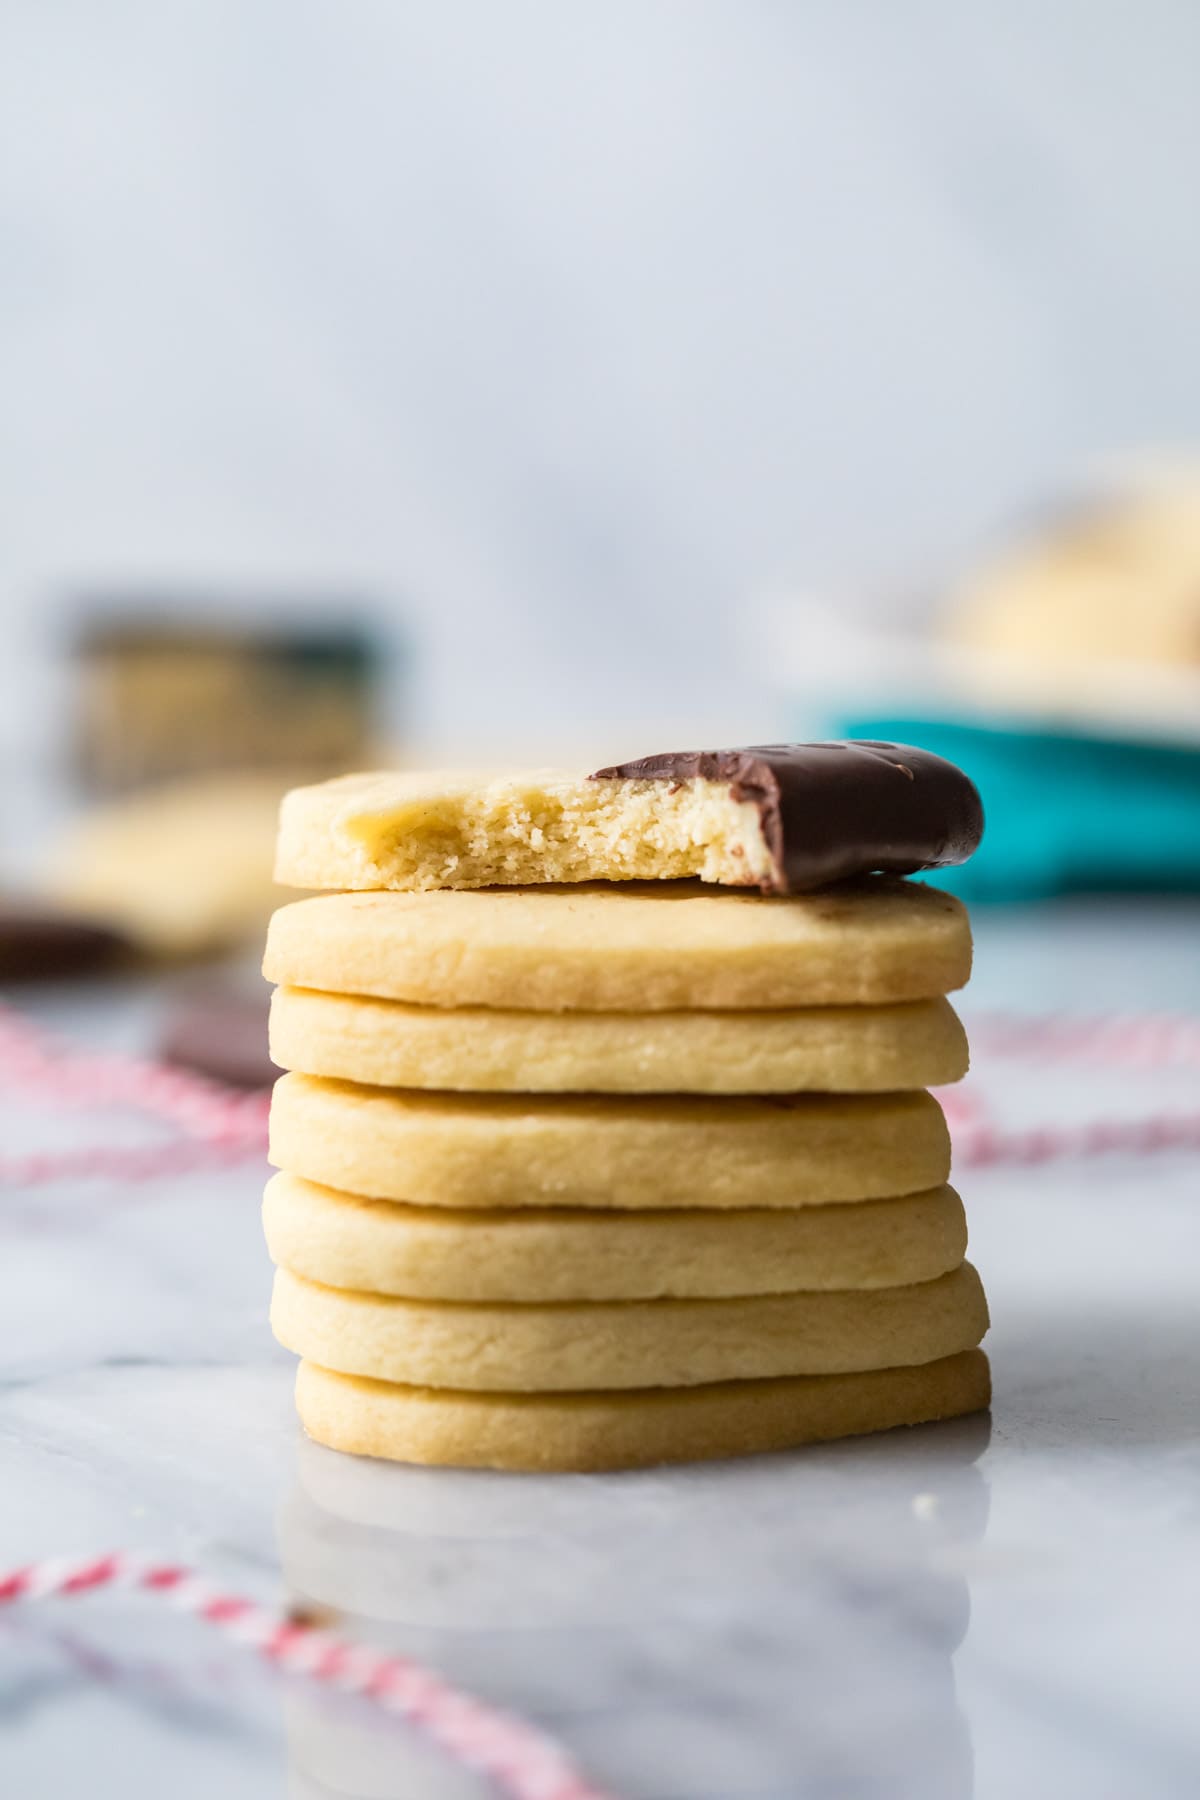 Stack of shortbread cookies with the top cookie missing a bite.